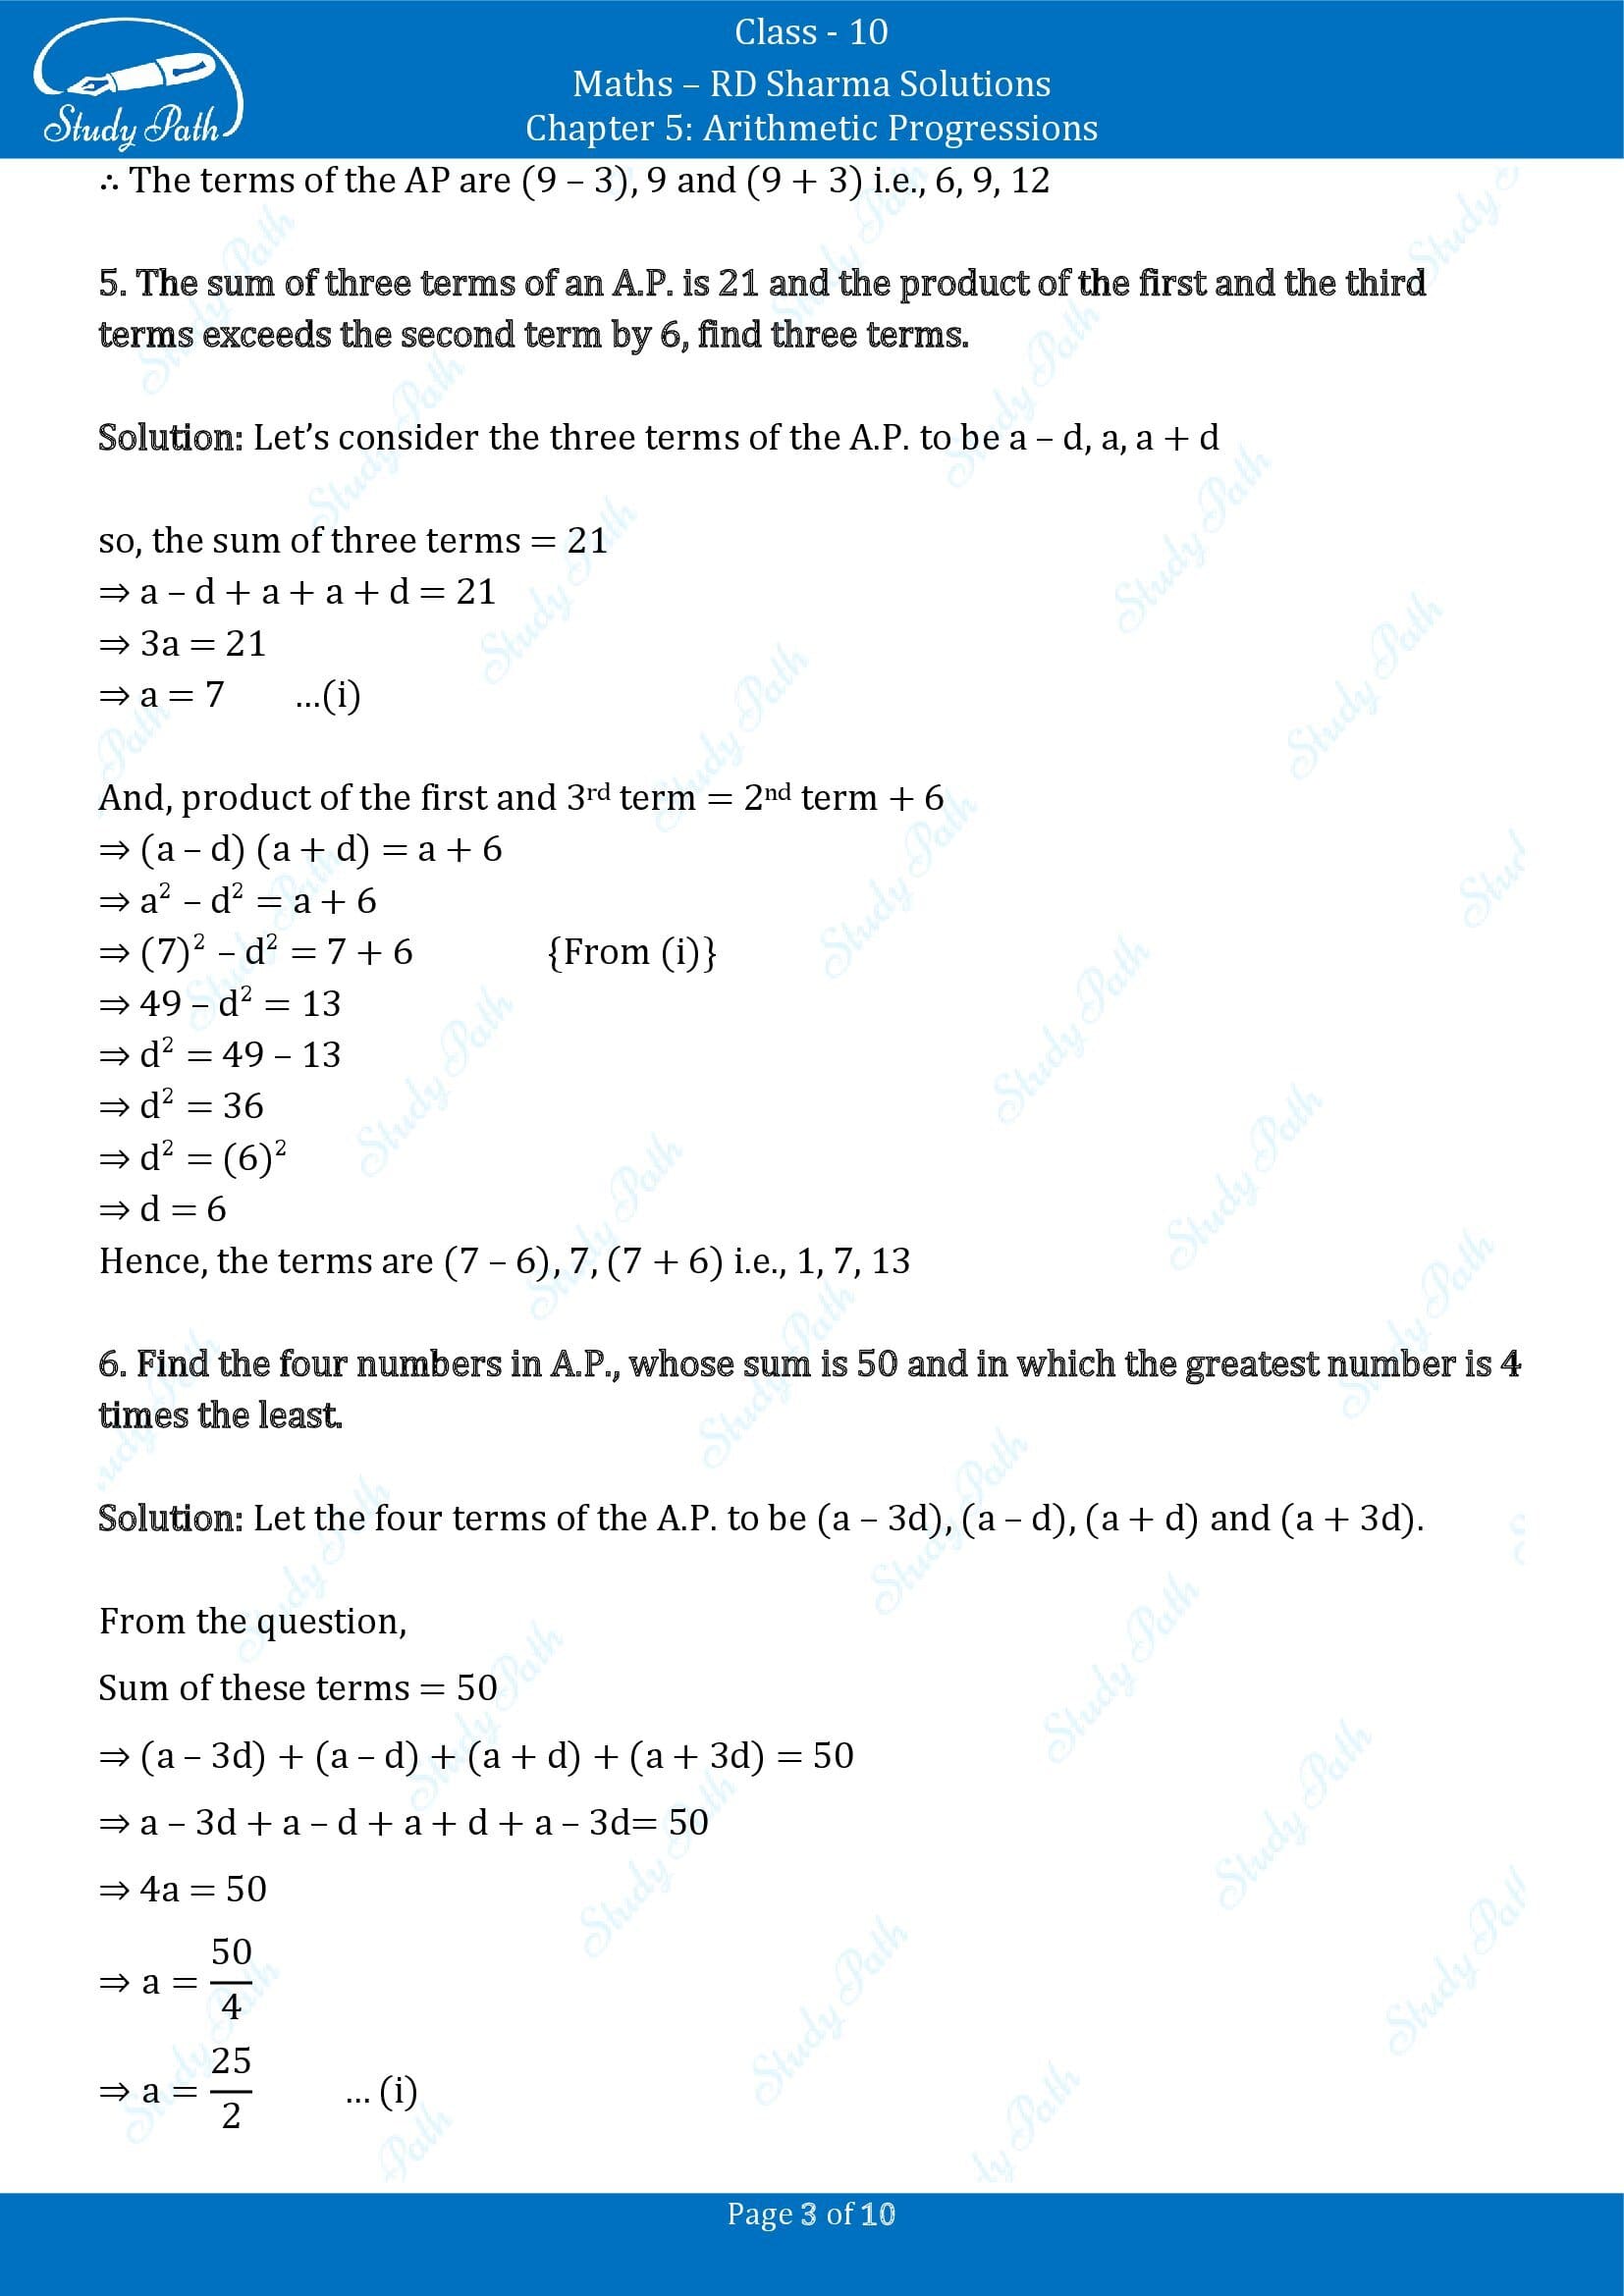 RD Sharma Solutions Class 10 Chapter 5 Arithmetic Progressions Exercise 5.5 00003